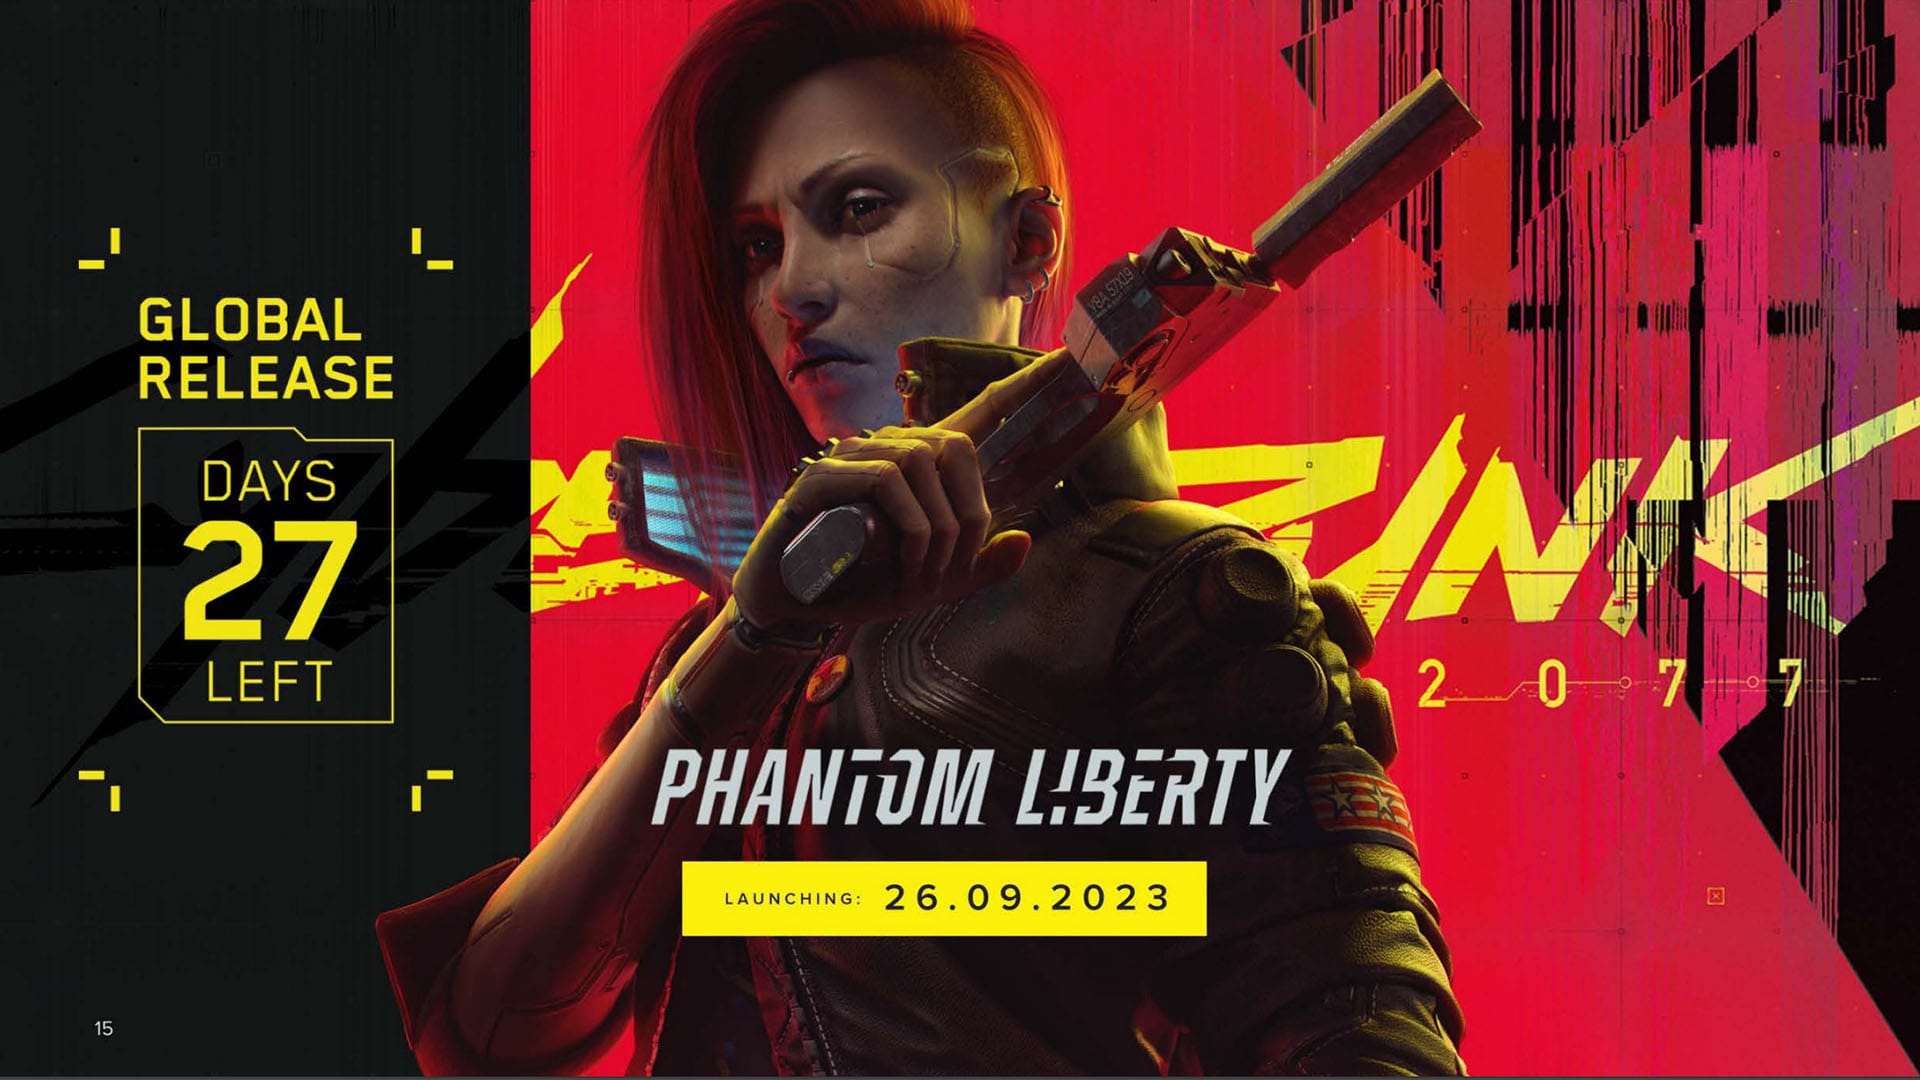 250 Developers Working on New The Witcher Game; CD Projekt Happy About Cyberpunk 2077 Phantom Liberty Pre-Orders